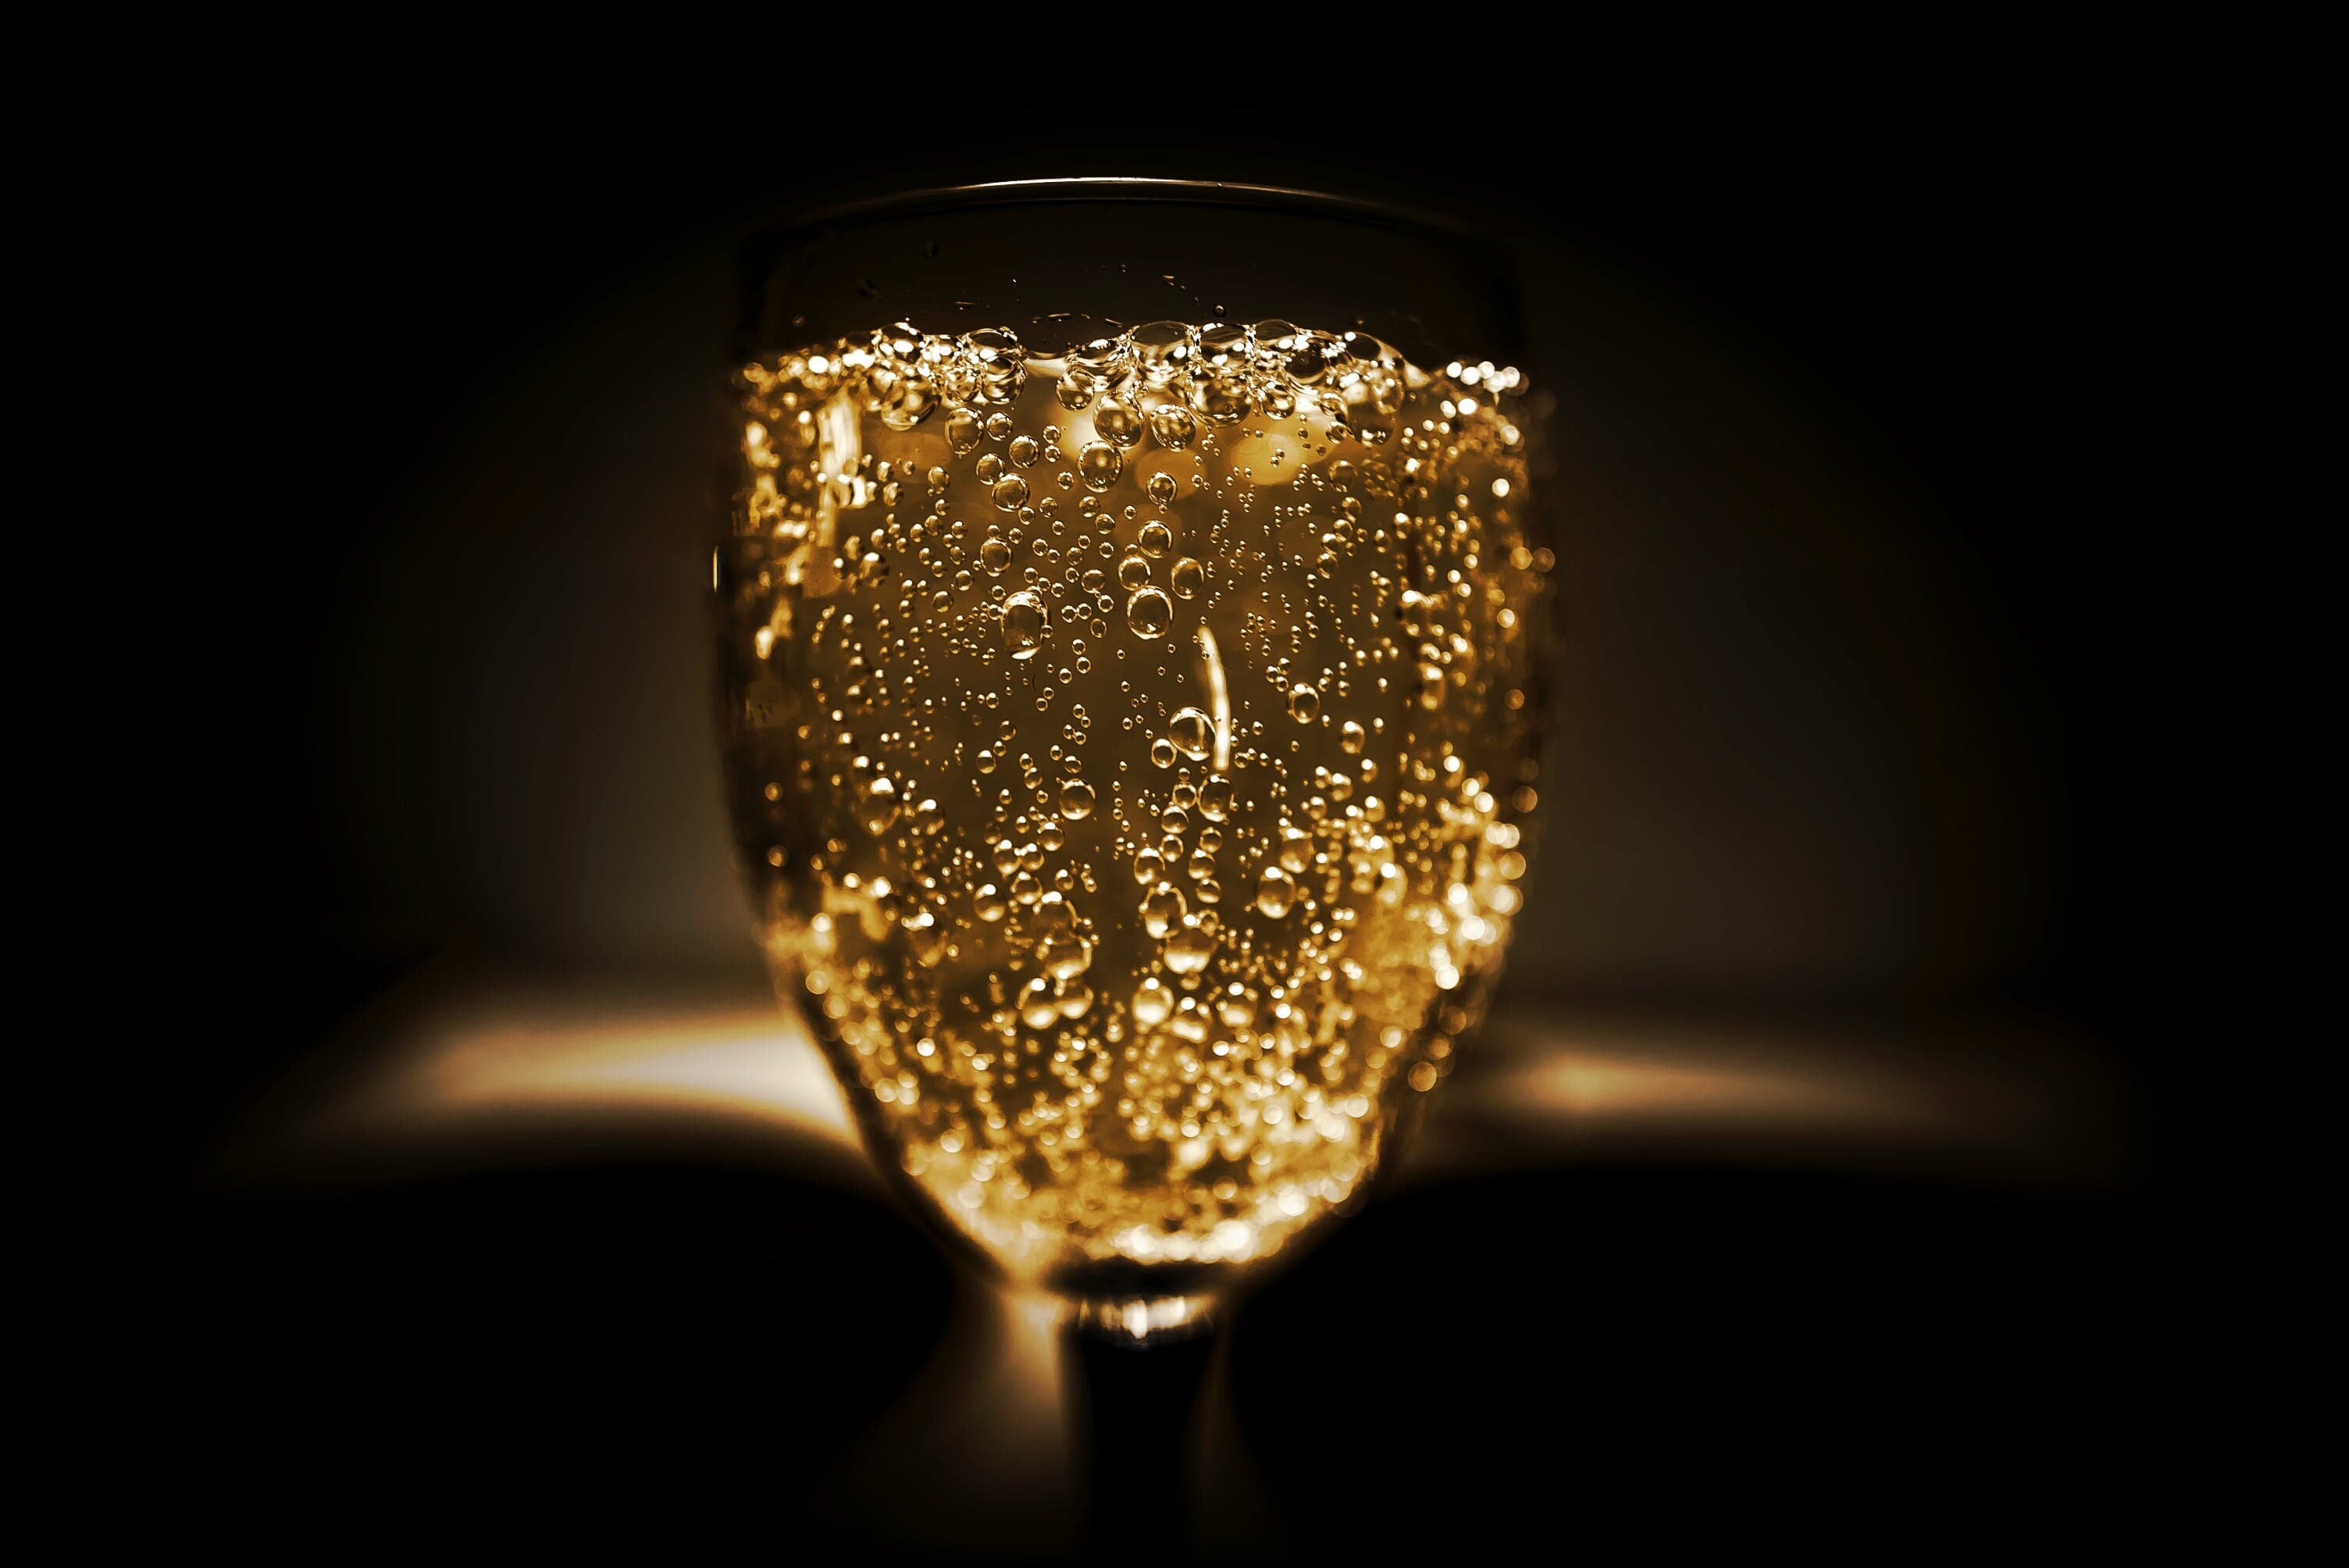 Unusual Ingredients In Cocktails: Edible Gold 